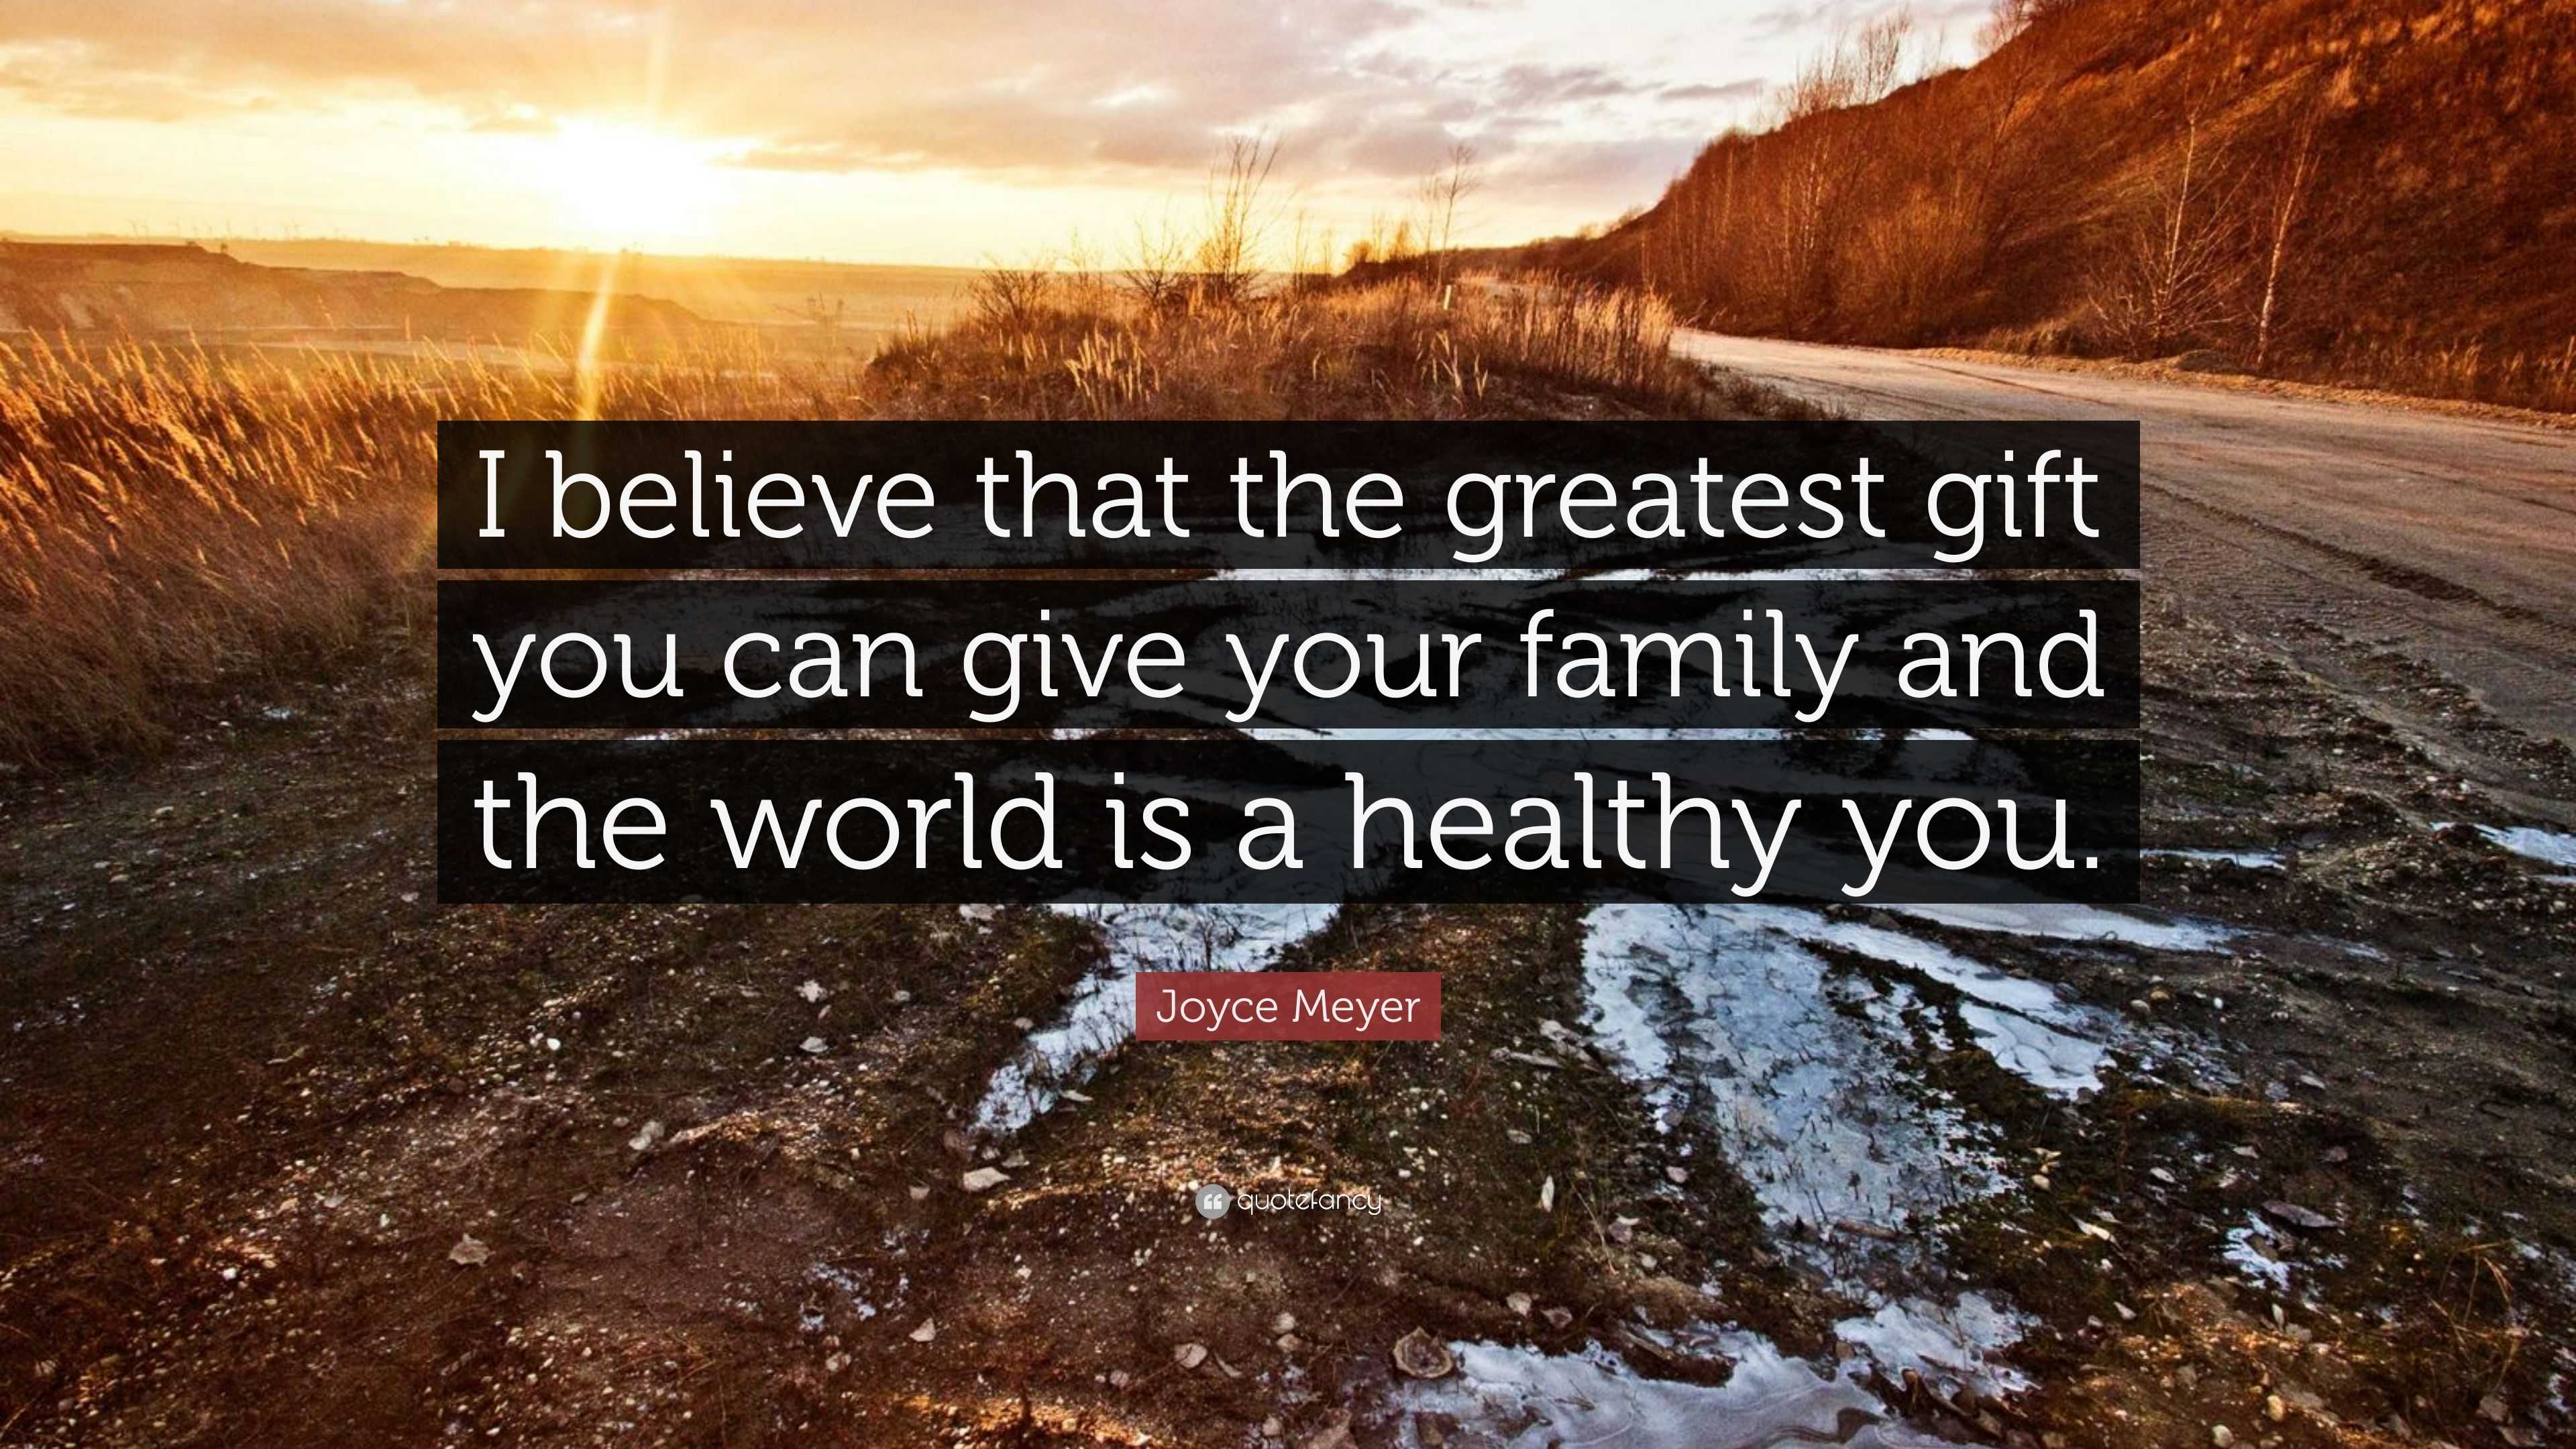 Joyce Meyer Quote: “I believe that the greatest gift you can give your